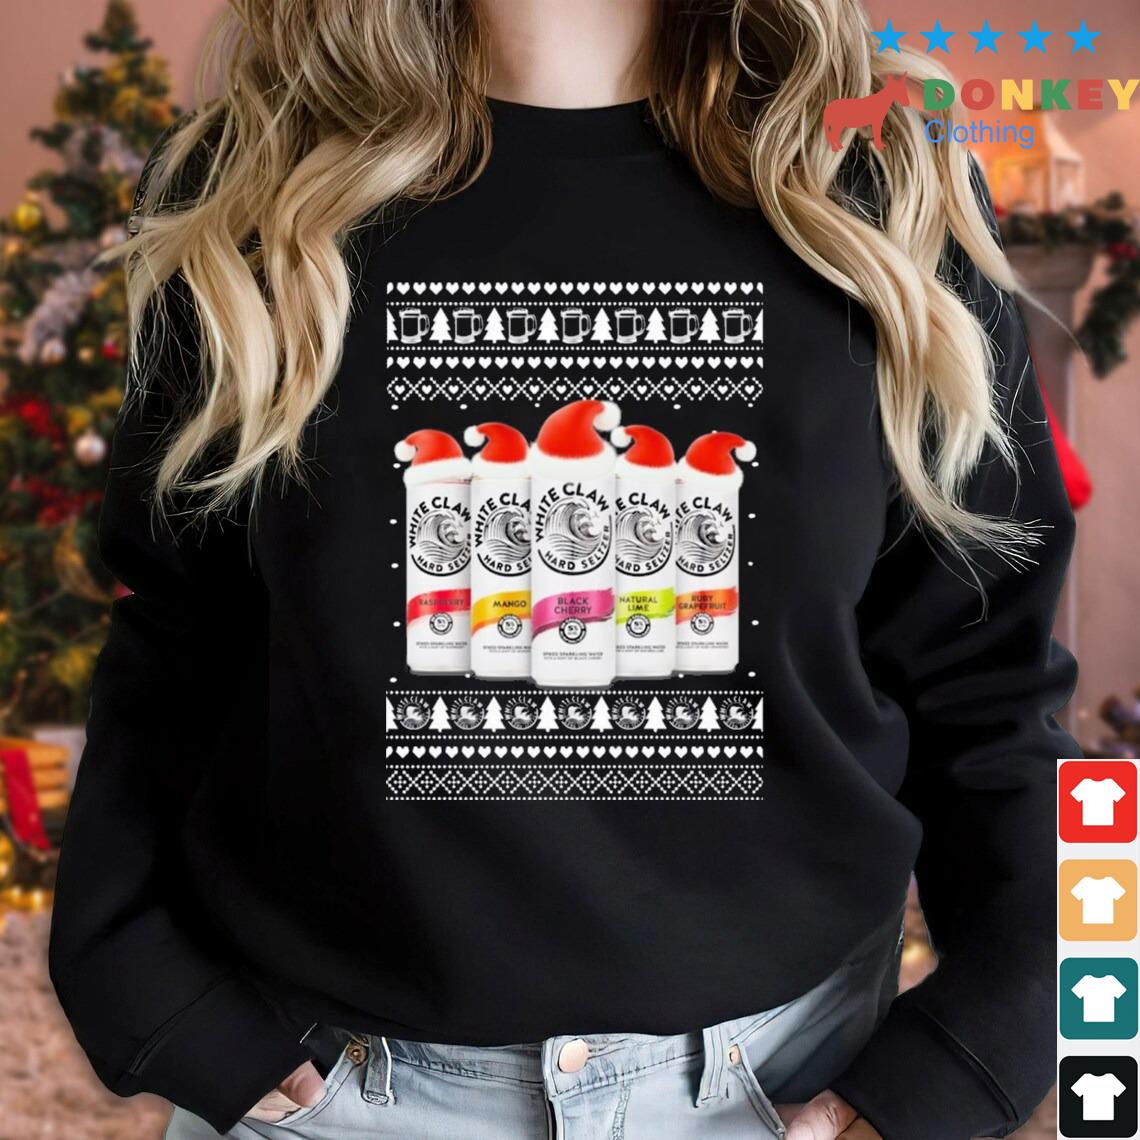 Five Flavors White Claw Hard Seltzer Ugly Christmas Sweater